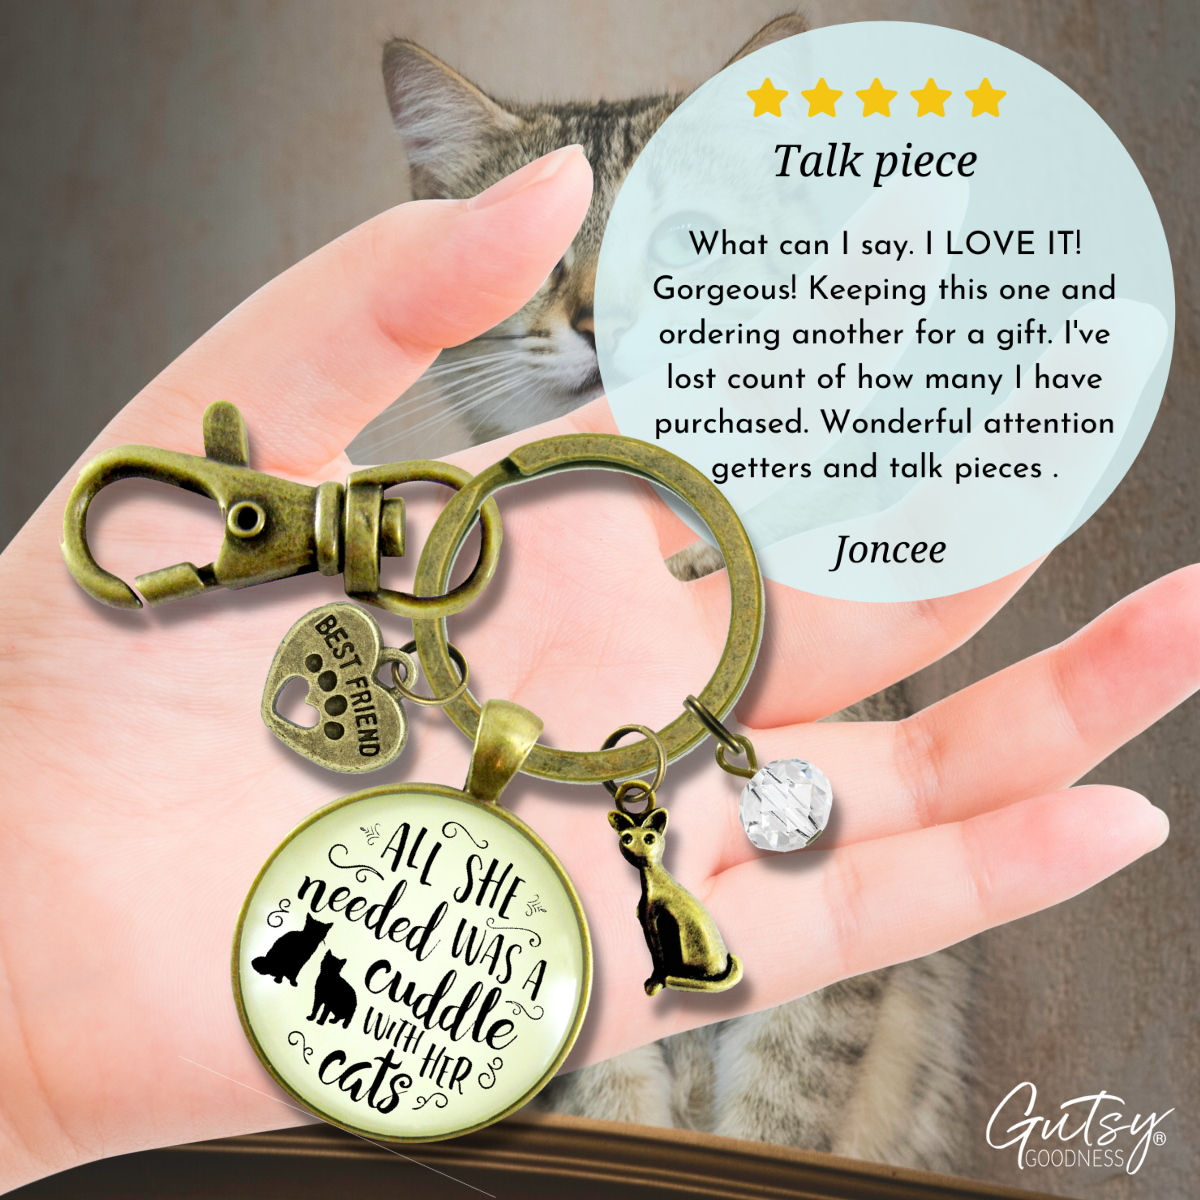 Cats Keychain All She Needed Was Cuddle Kitty Theme Gift Chic Cats Jewelry For Women - Gutsy Goodness Handmade Jewelry;Cats Keychain All She Needed Was Cuddle Kitty Theme Gift Chic Cats Jewelry For Women - Gutsy Goodness Handmade Jewelry Gifts